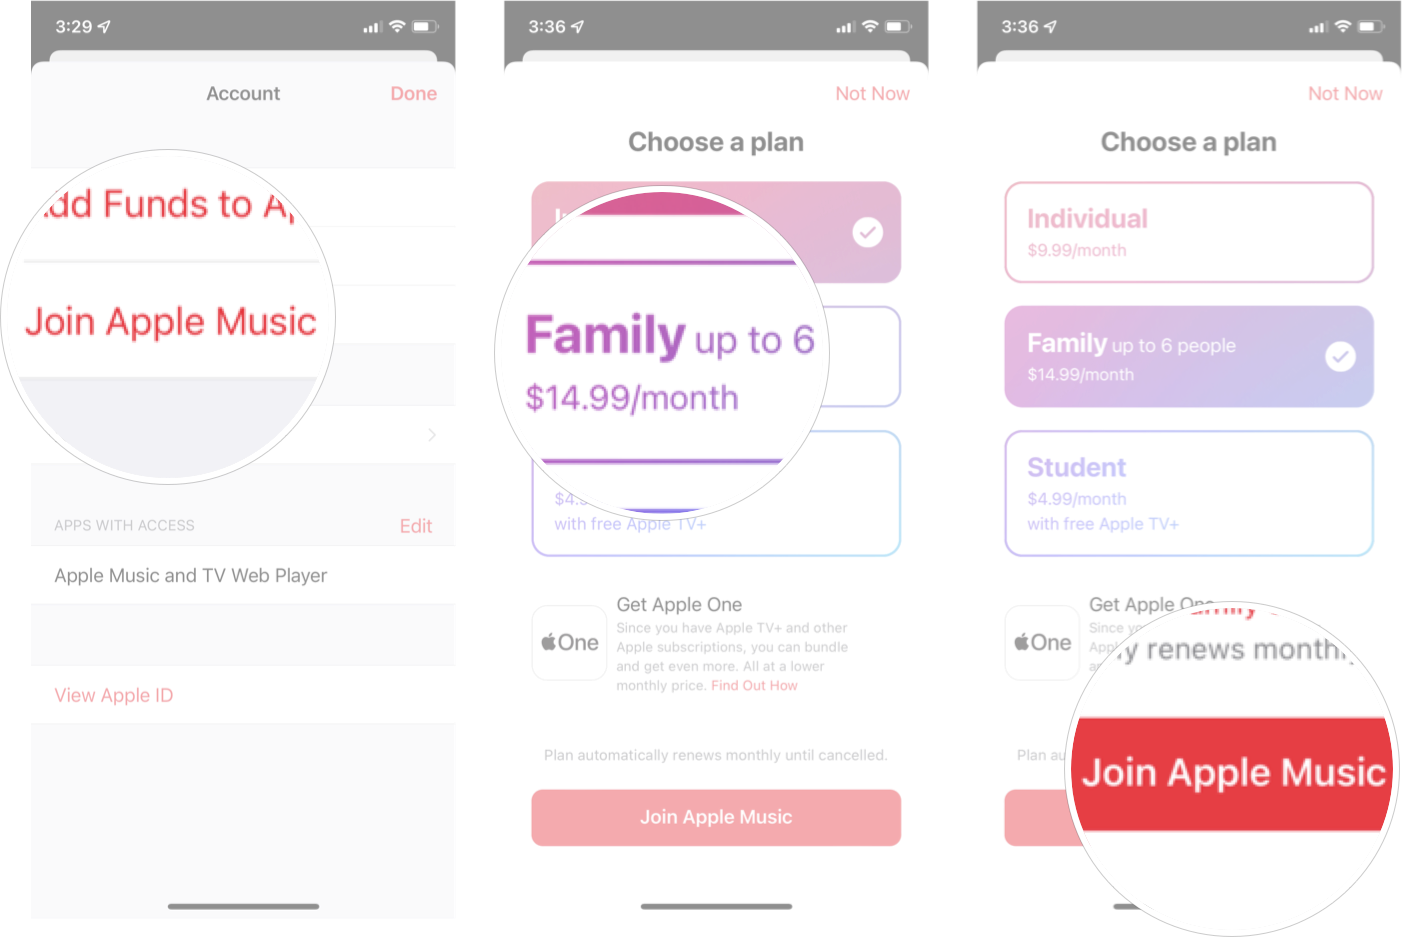 Sign Up For Apple Music Family Plan iOS 15: Tap Join Apple Music, tap the Family plan, and then tap Join Apple Music